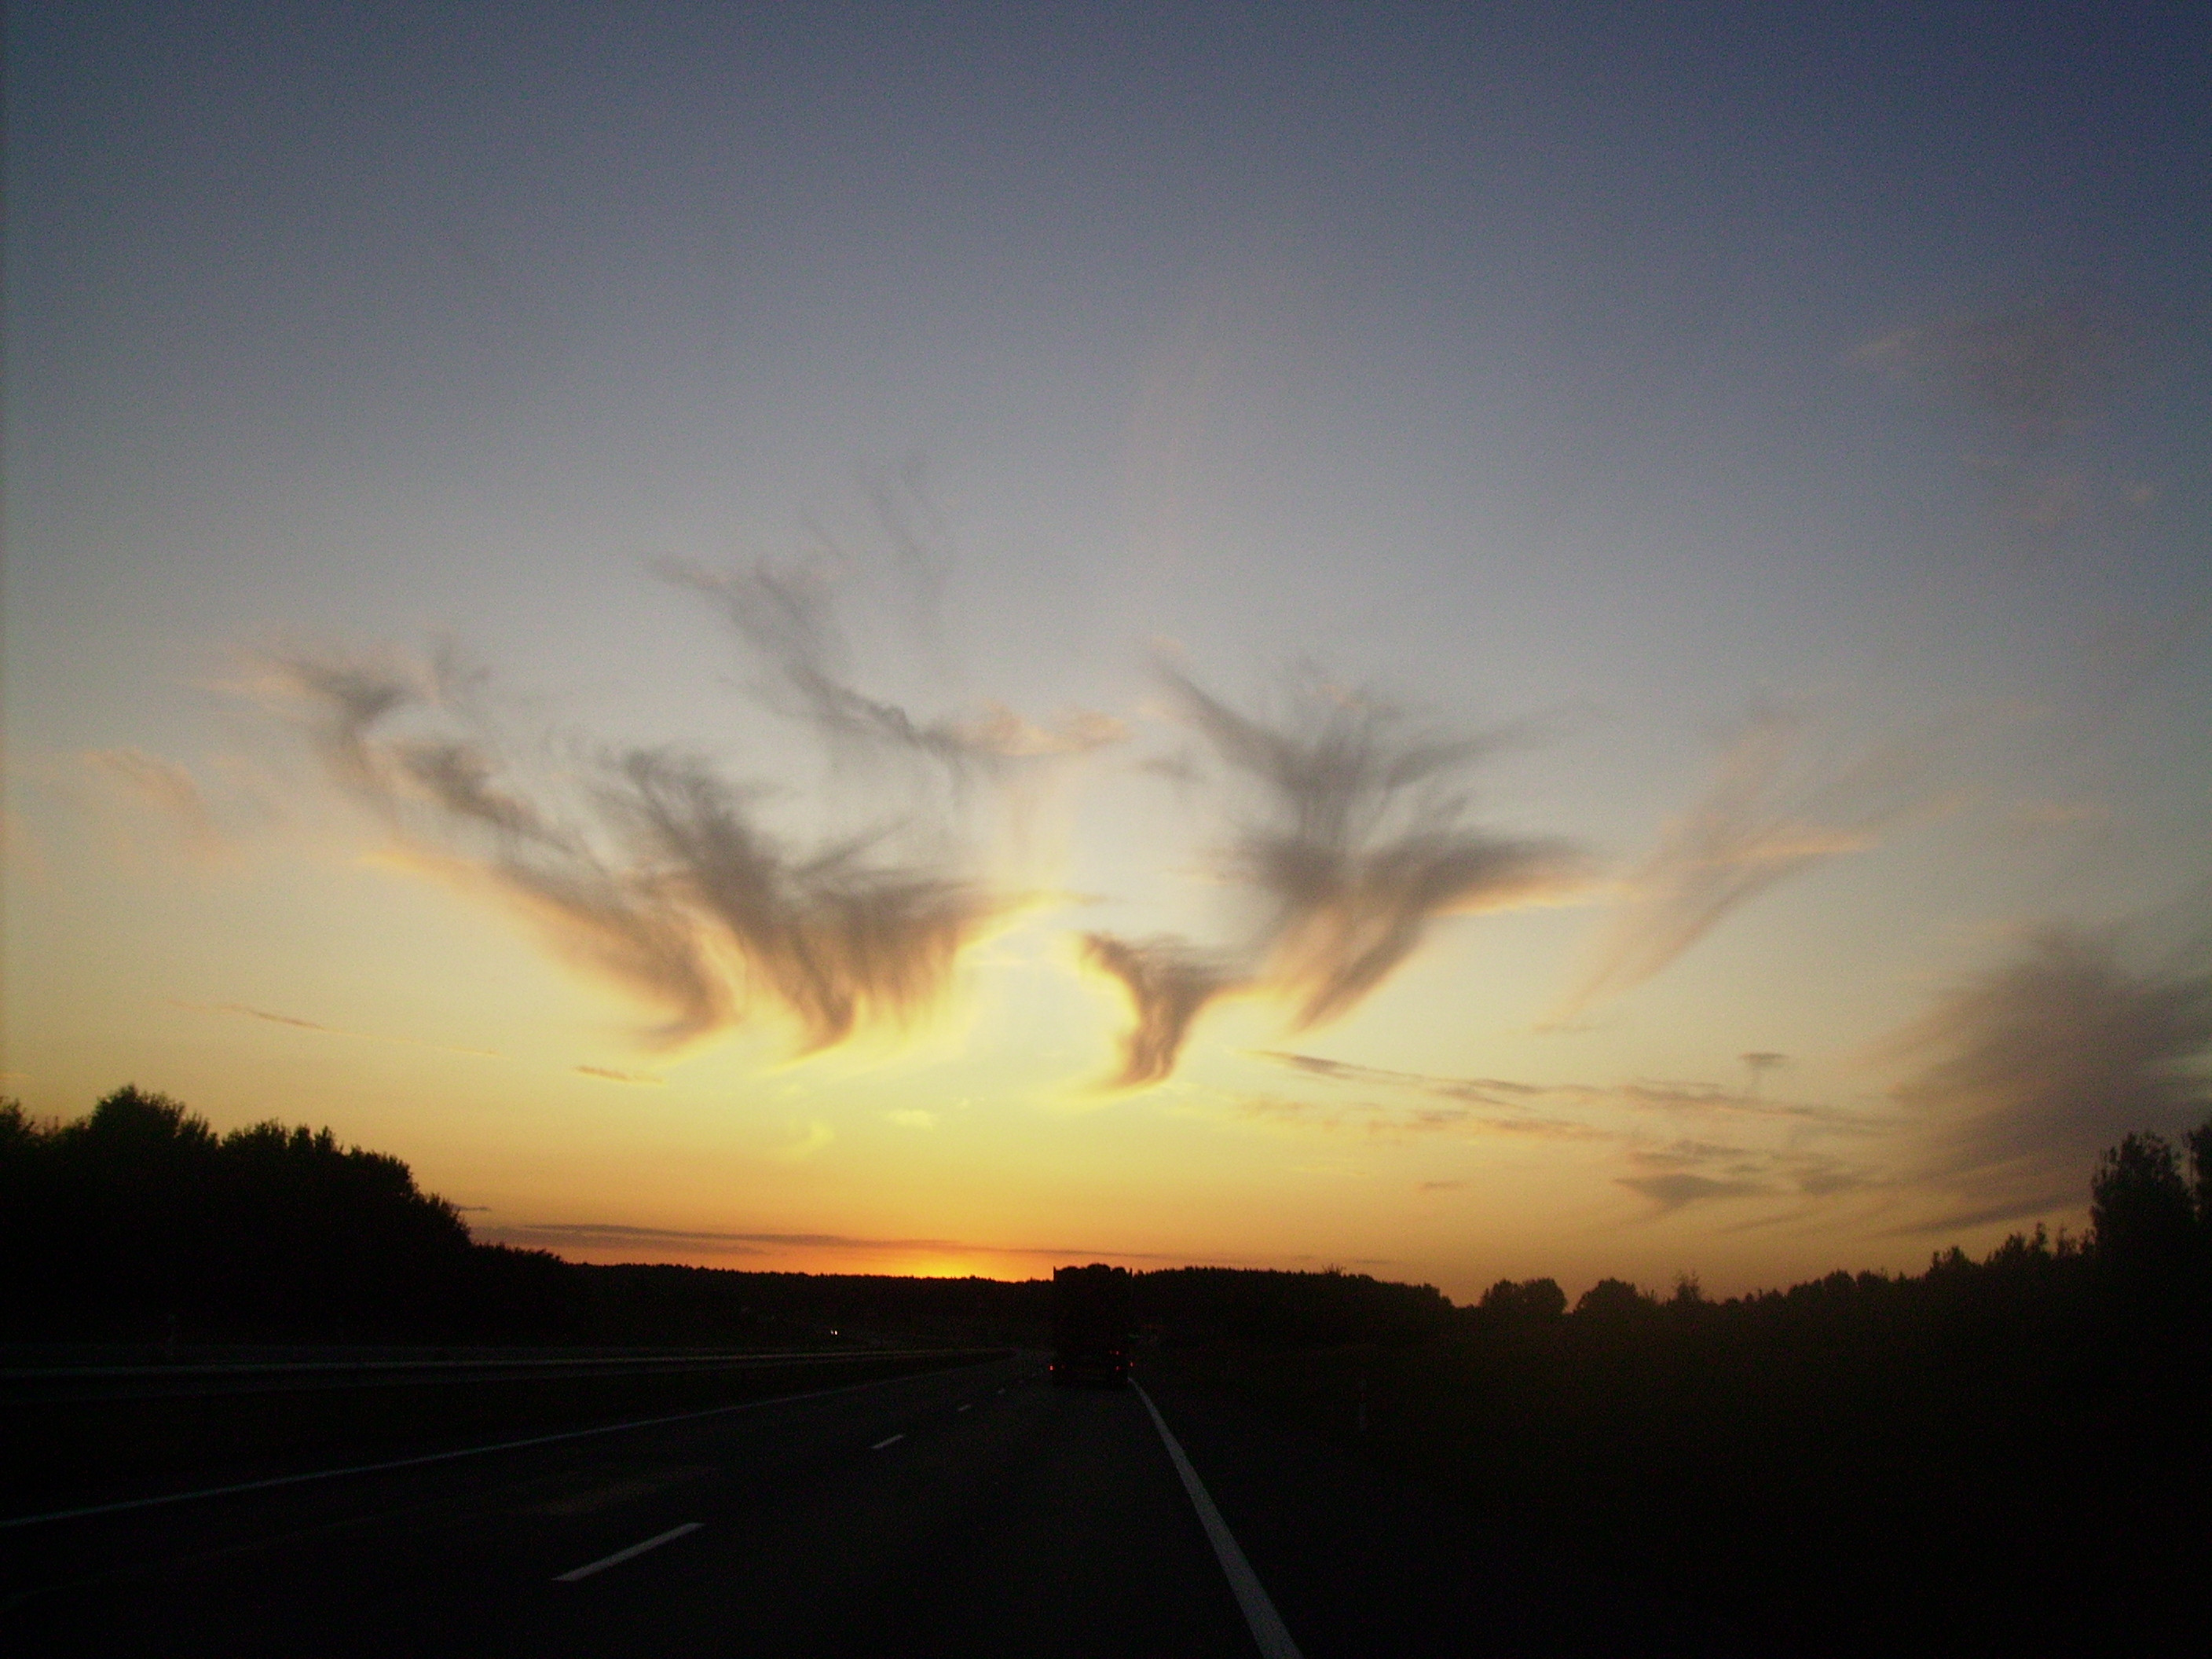 These clouds look like angels - Imgur